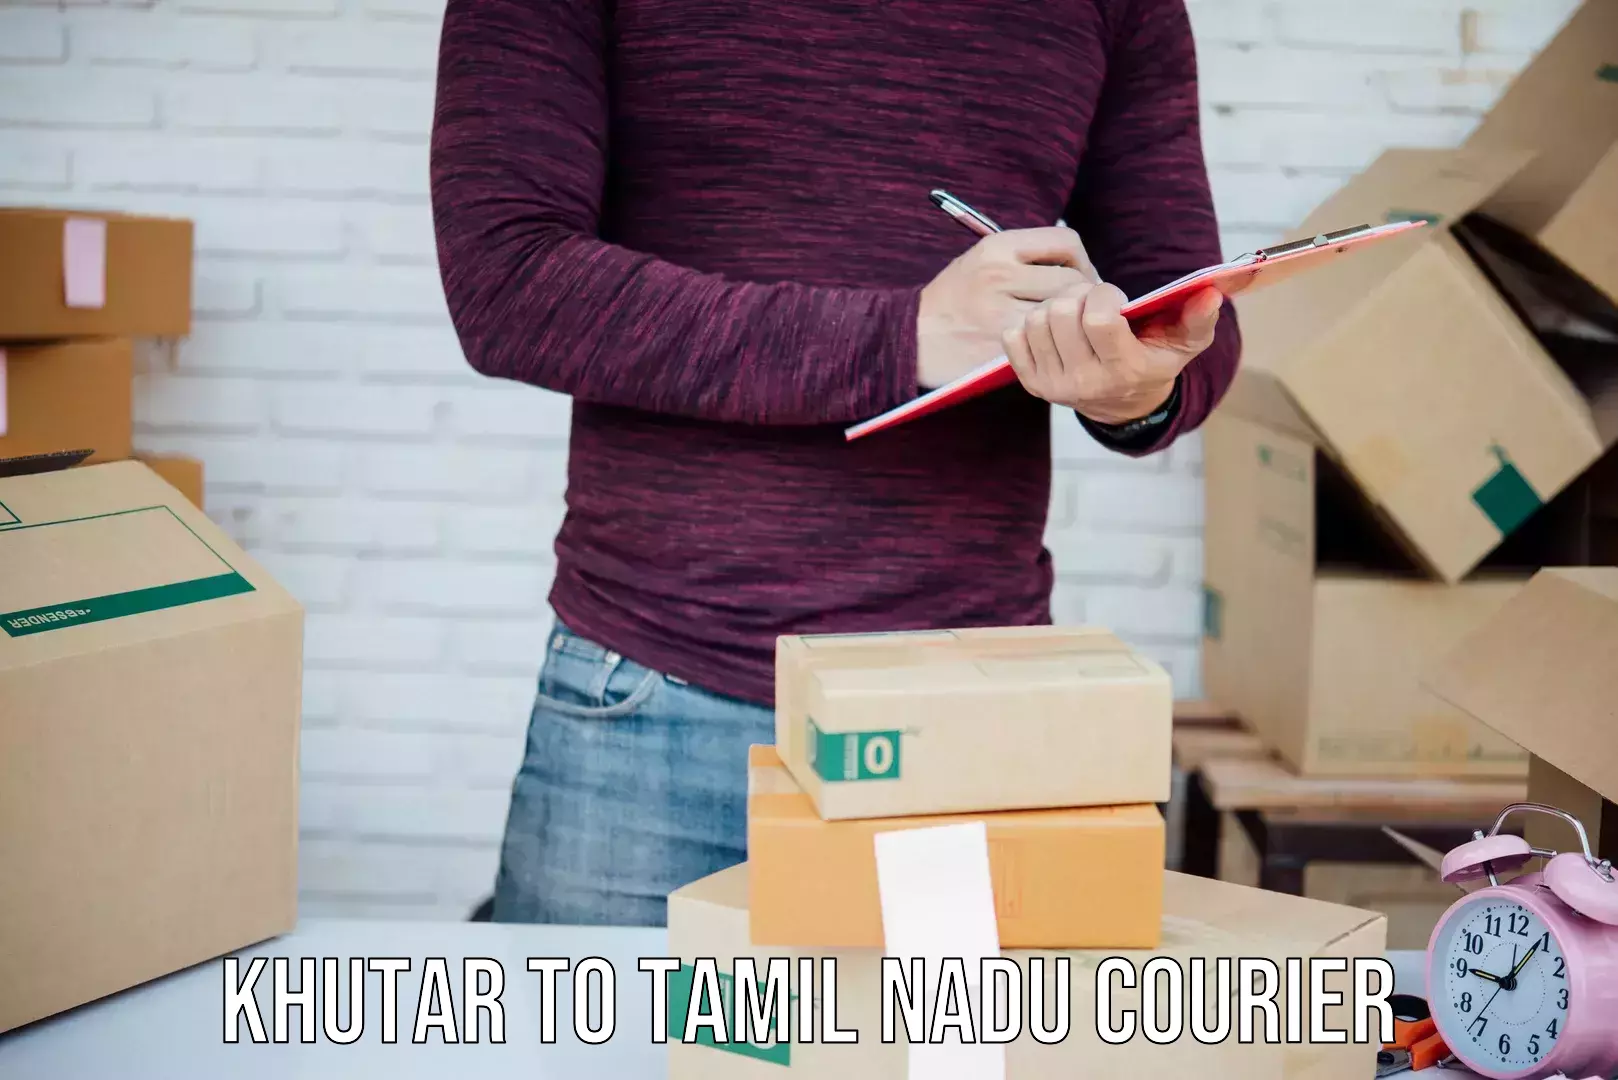 Small business couriers Khutar to Tamil Nadu